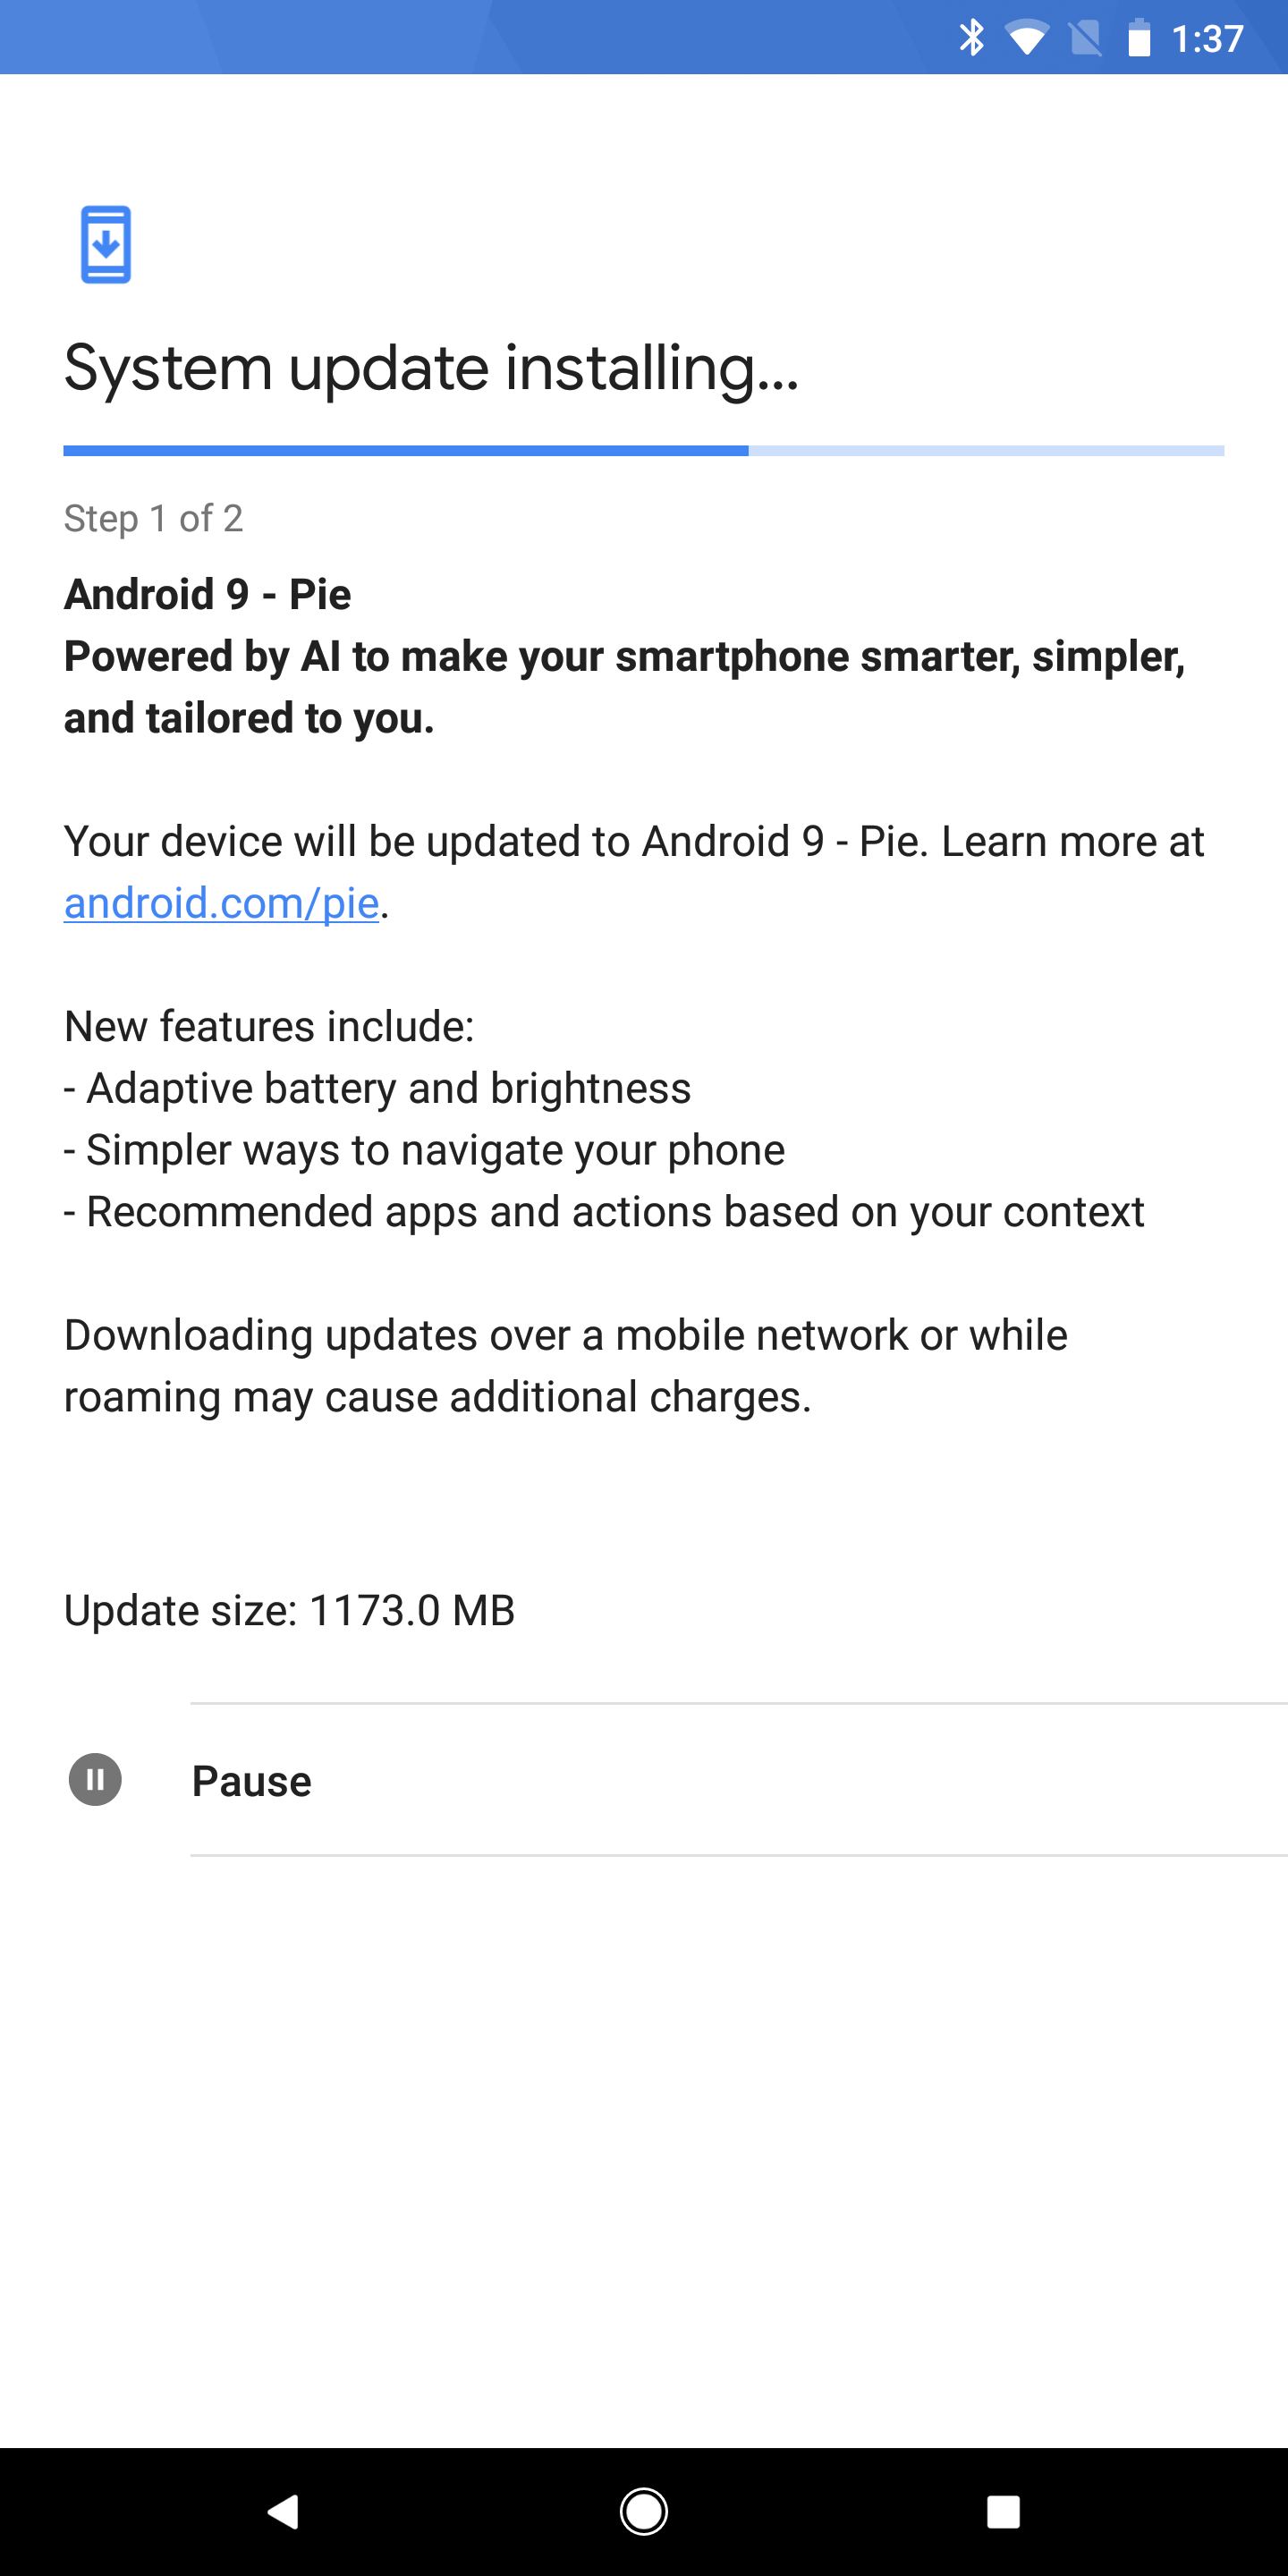 A screenshot of the Google Pixel 2 XL receiving the Android 9.0 Pie OTA.